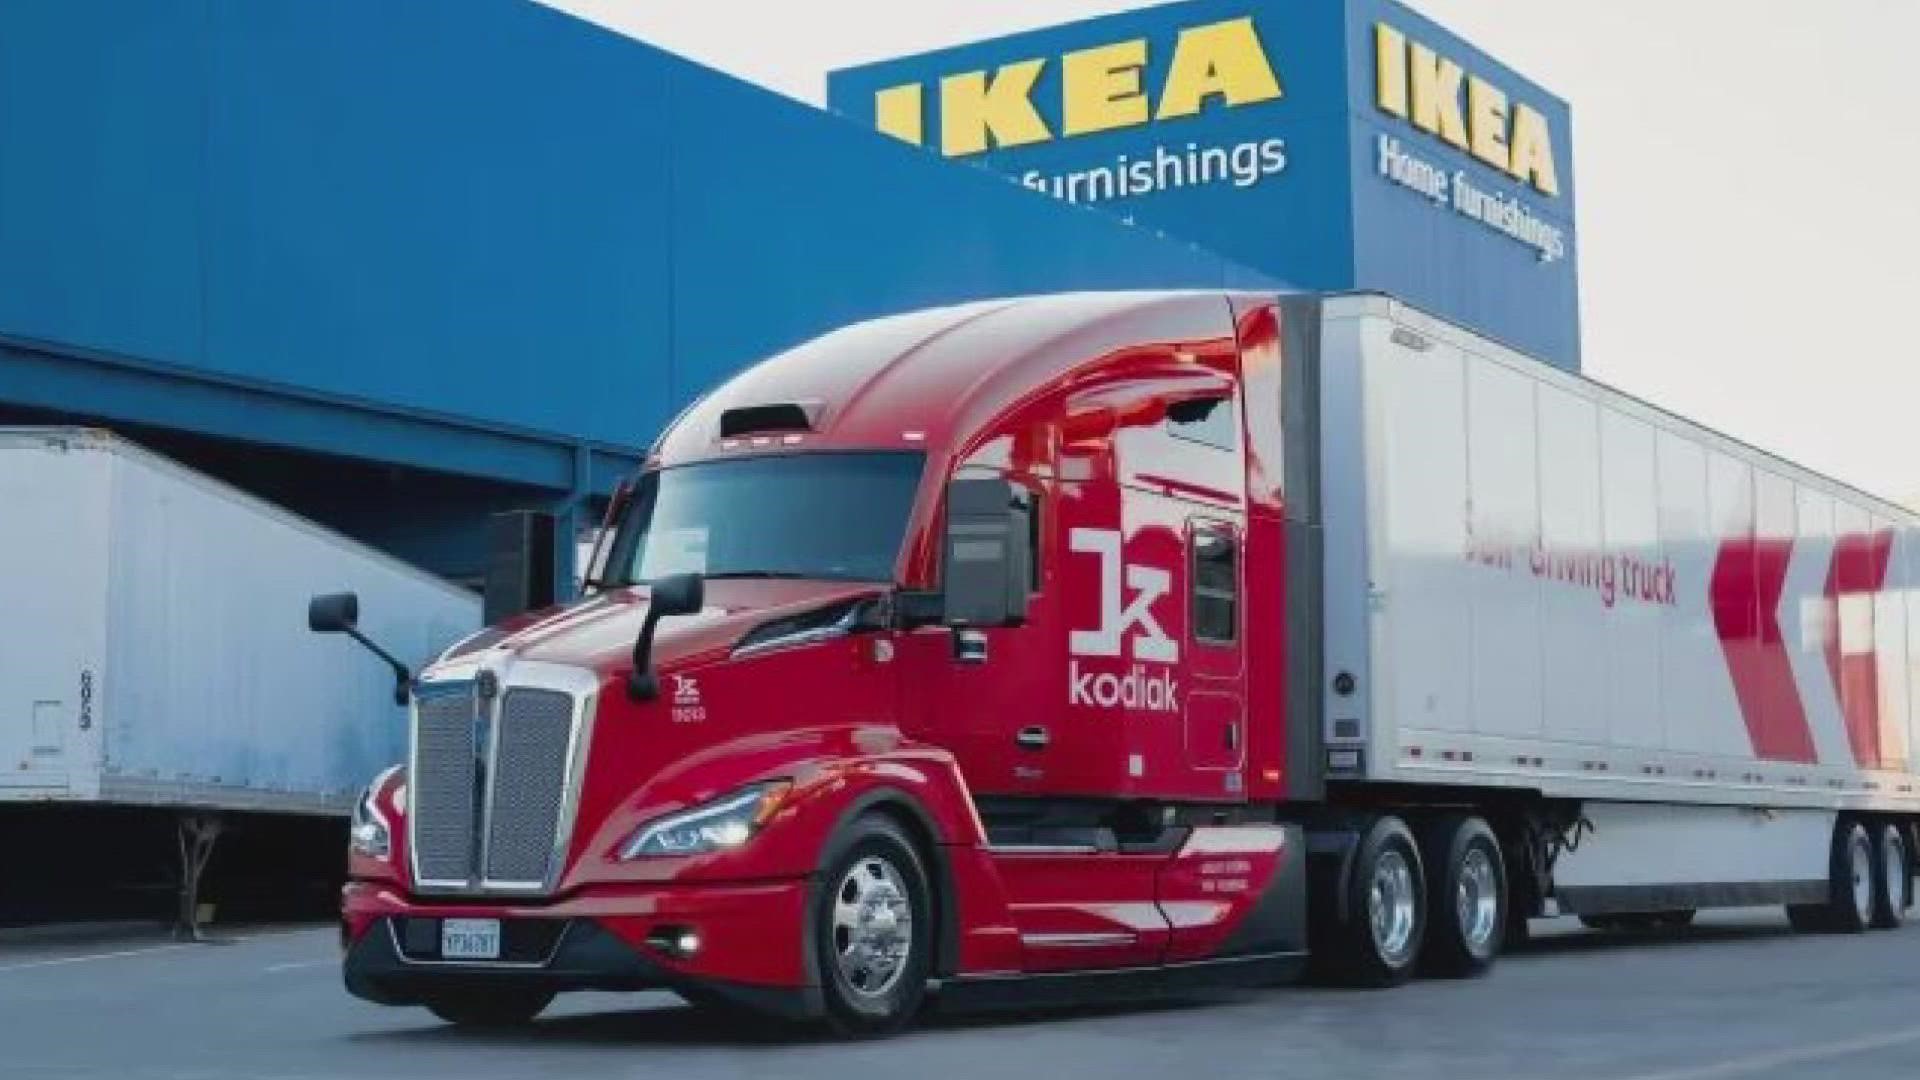 In April, Kodiak Robotics teamed up with U.S. Xpress to launch Level 4 autonomous freight service between DFW and Atlanta using the company's self-driving trucks.